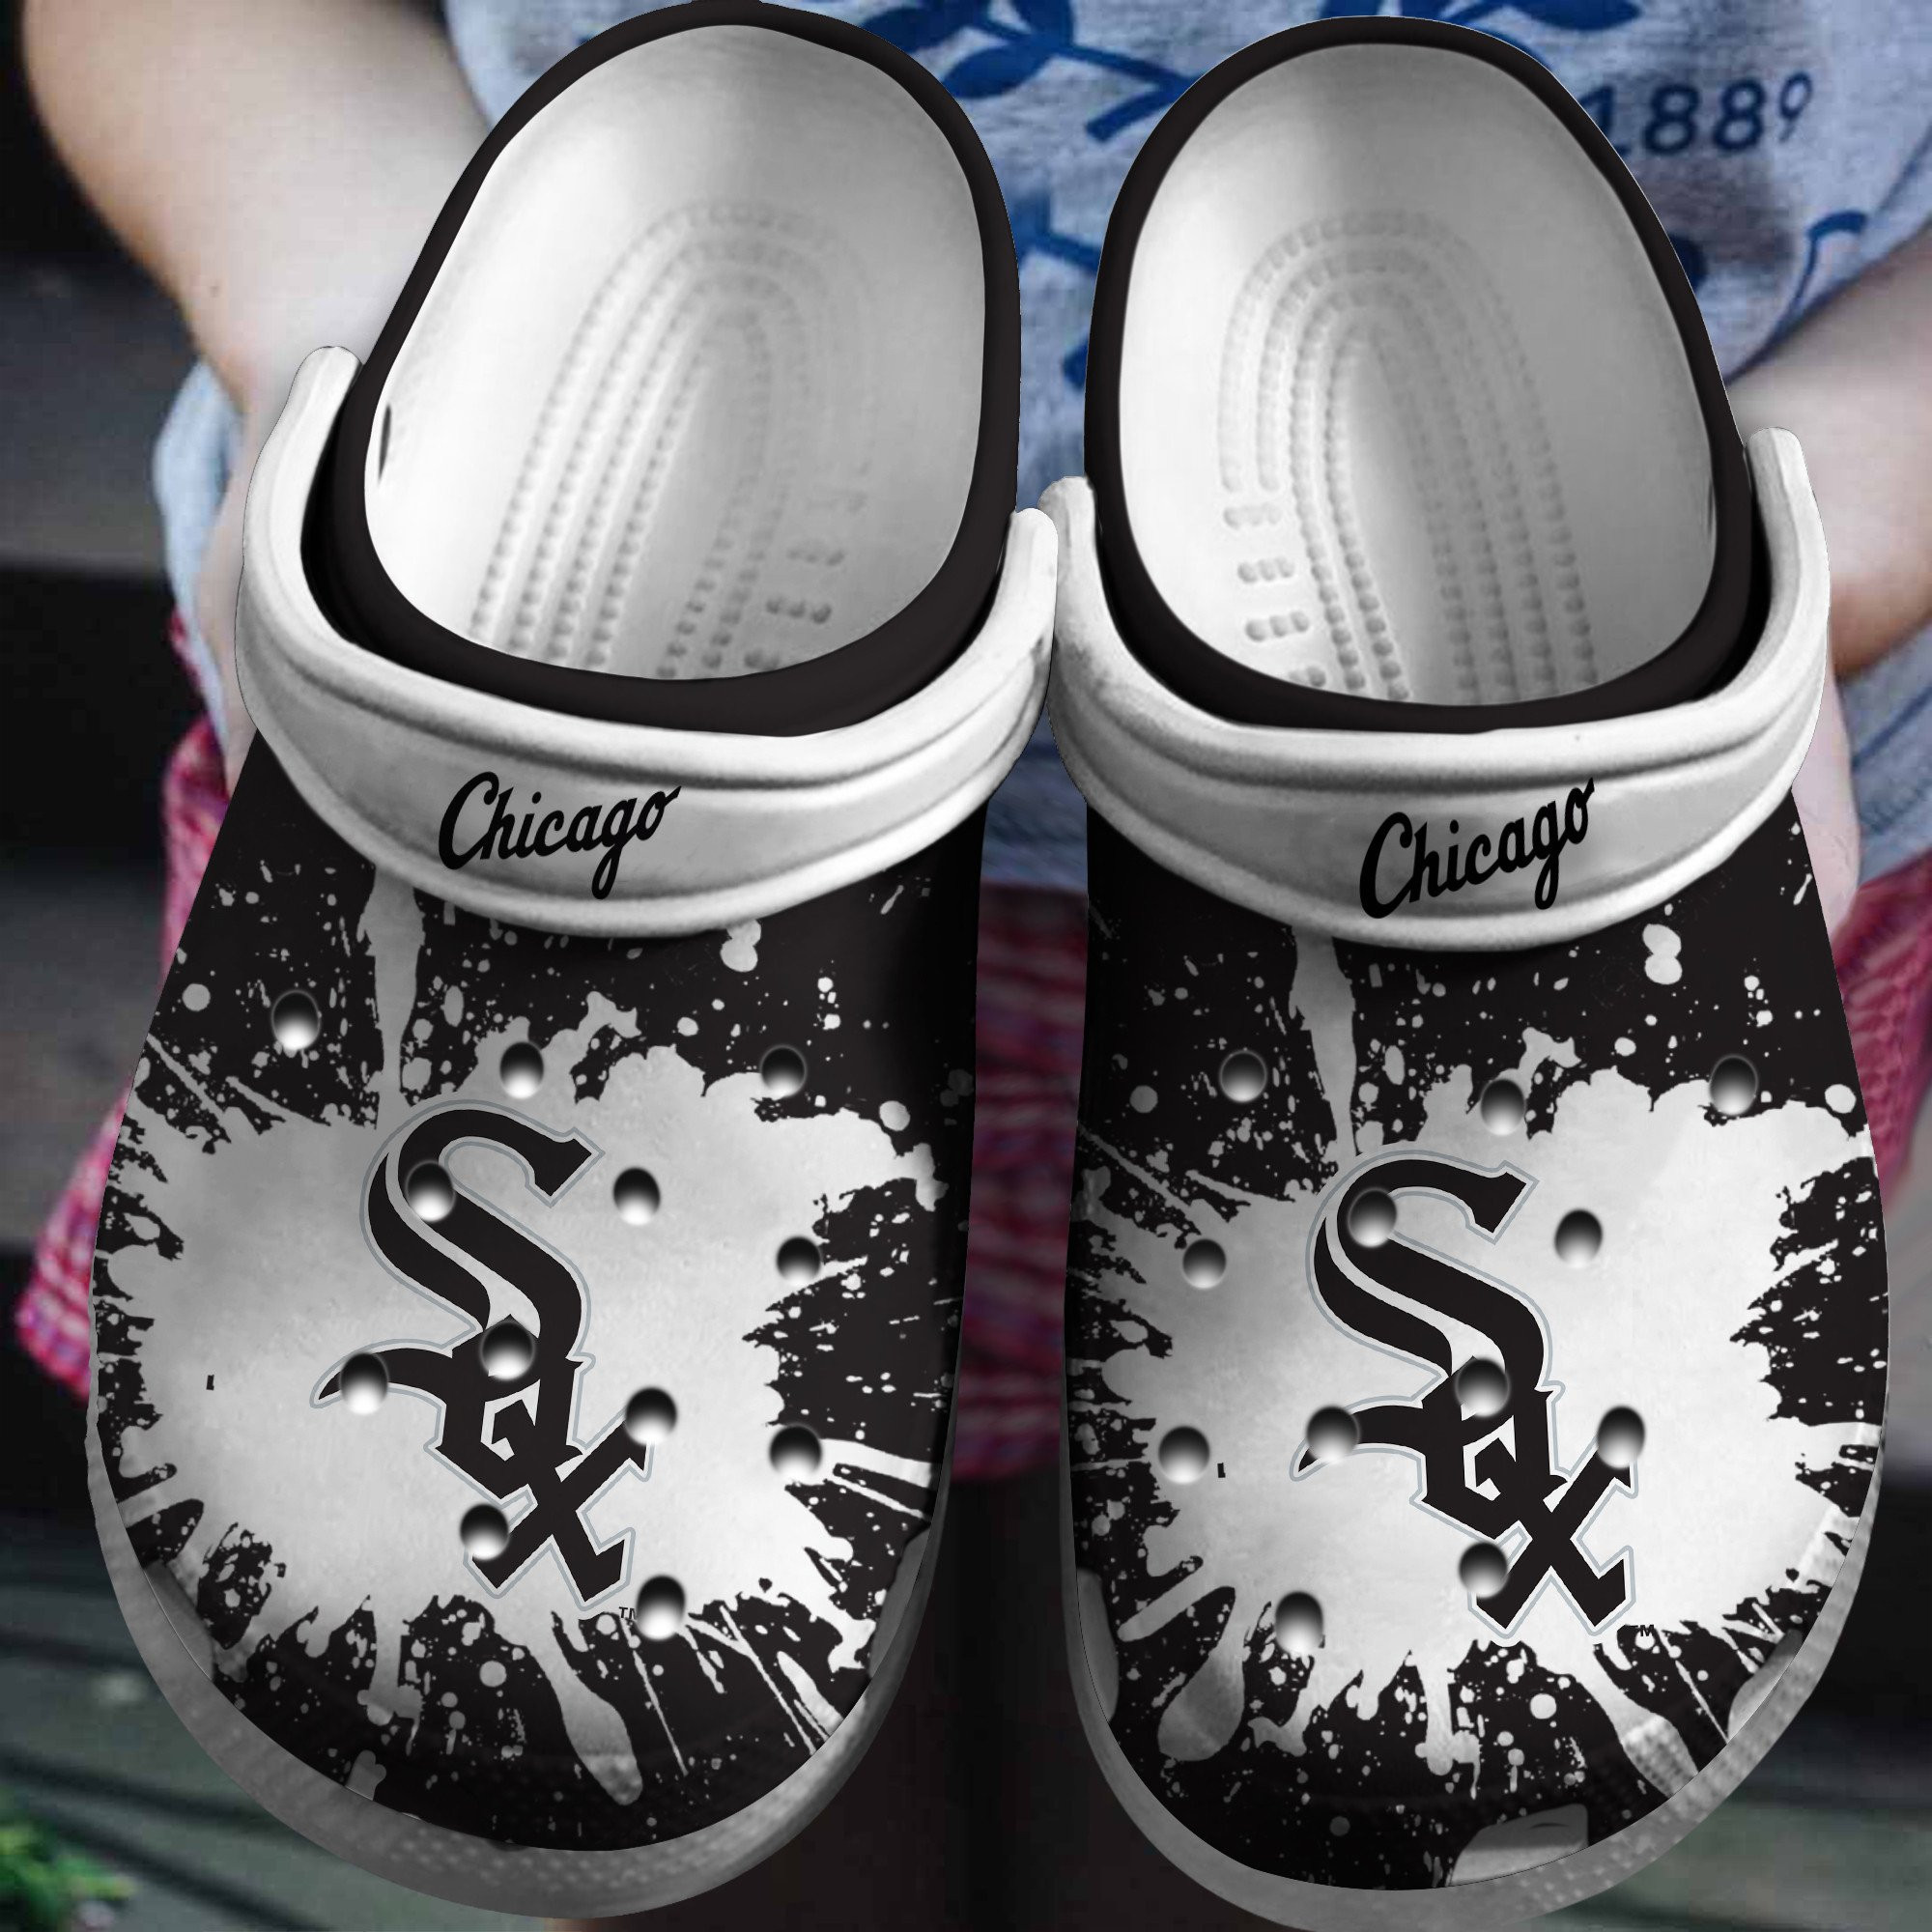 Hot Mlb Team Chicago White Sox White-Black Crocs Clog Shoesshoes Trusted Shopping Online In The World